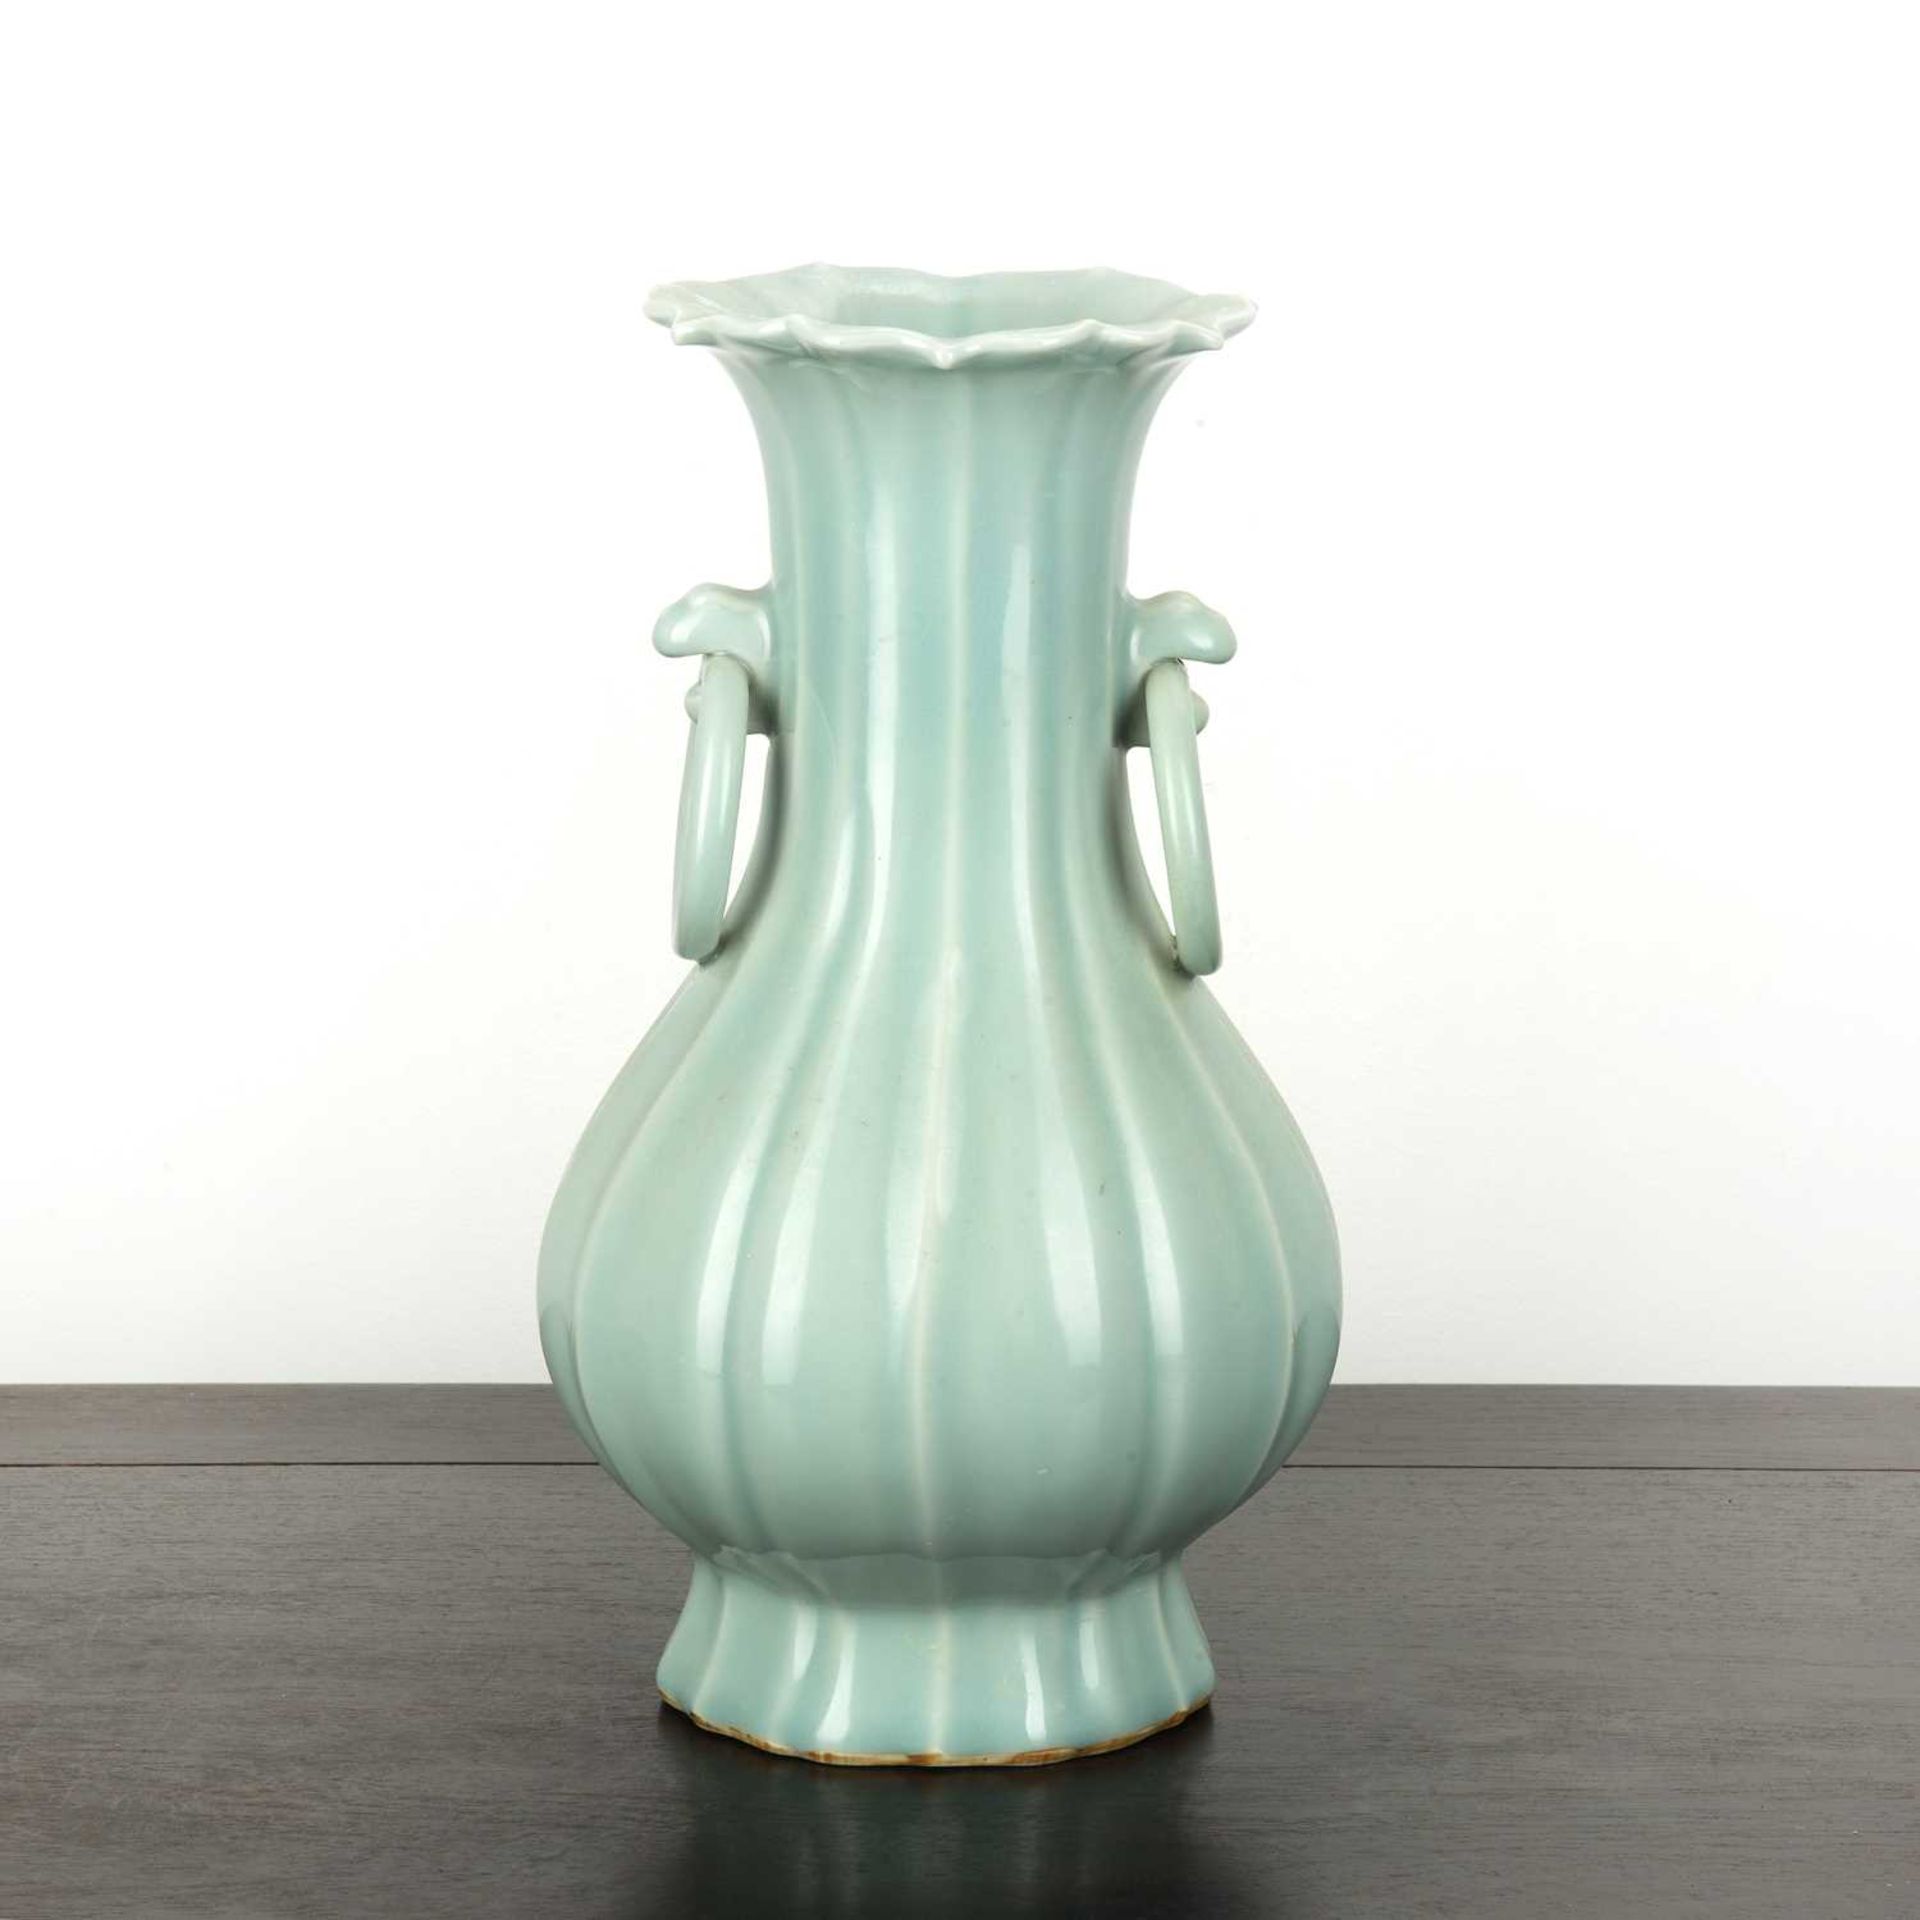 Celadon riveted vase Chinese covered with a pale celadon glaze, flanked by two set handles with